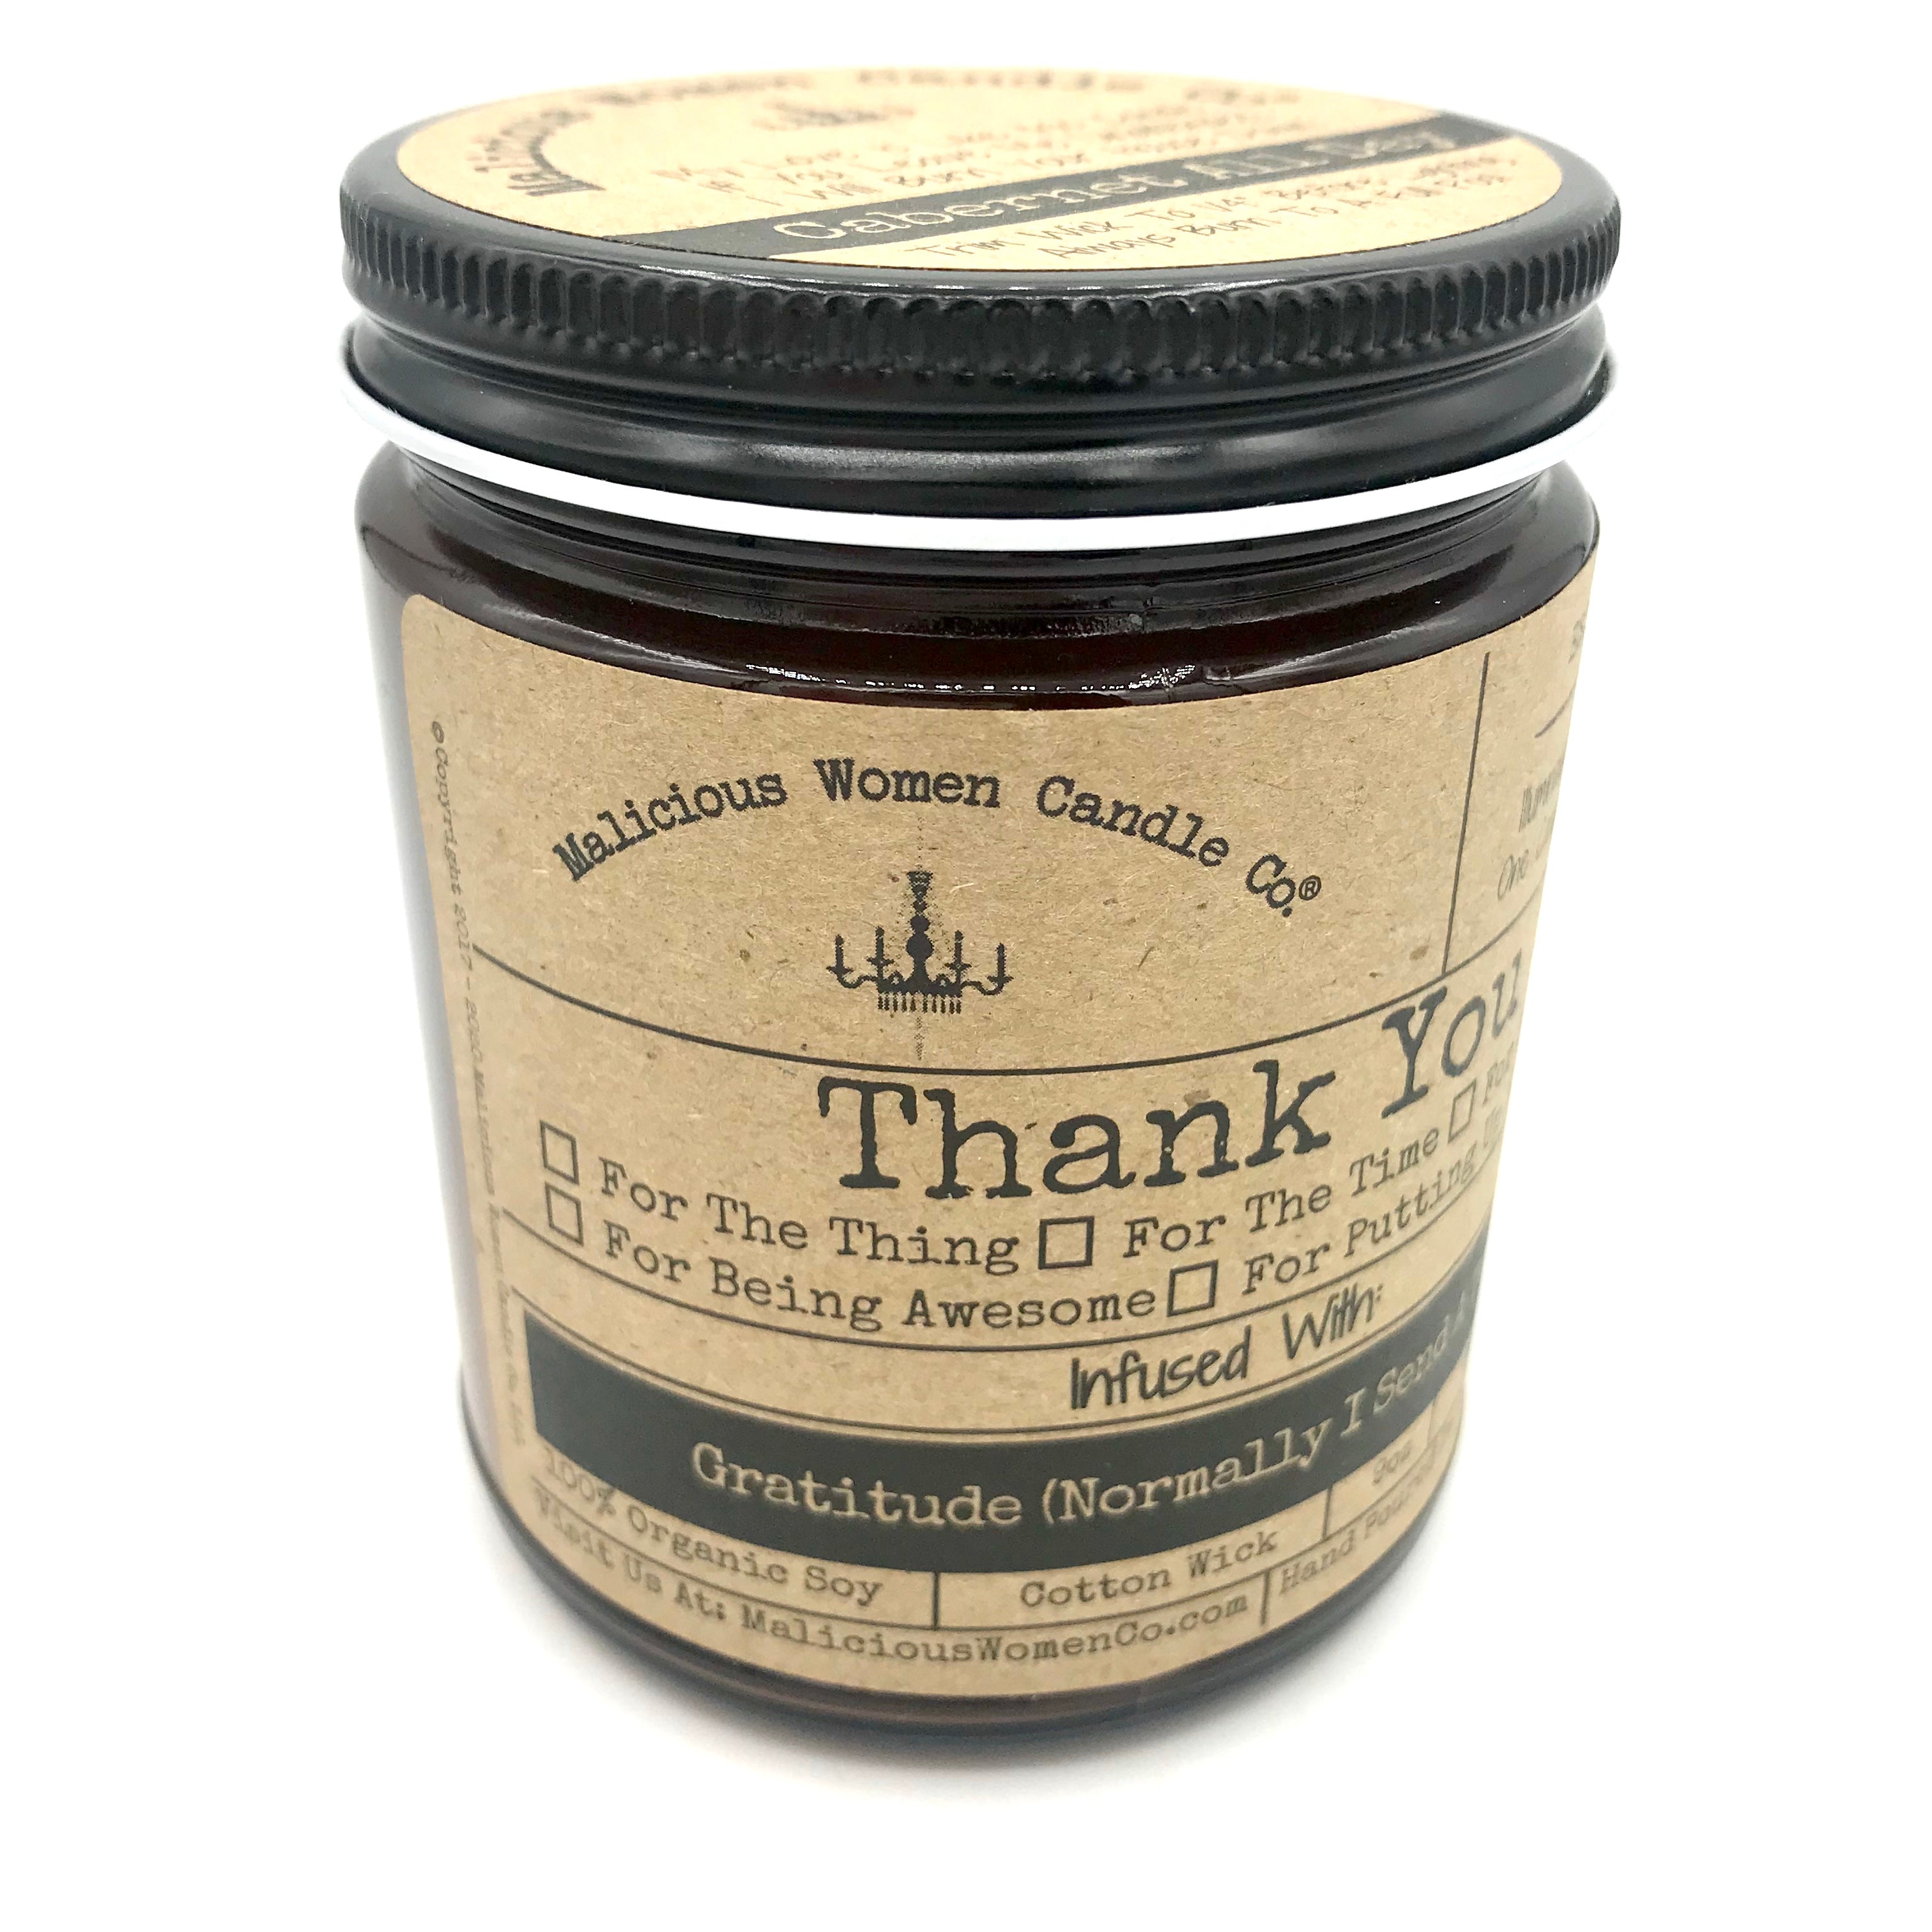 Thank You -Infused with "Gratitude (Normally I Send A Text) Scent: Cabernet All Day